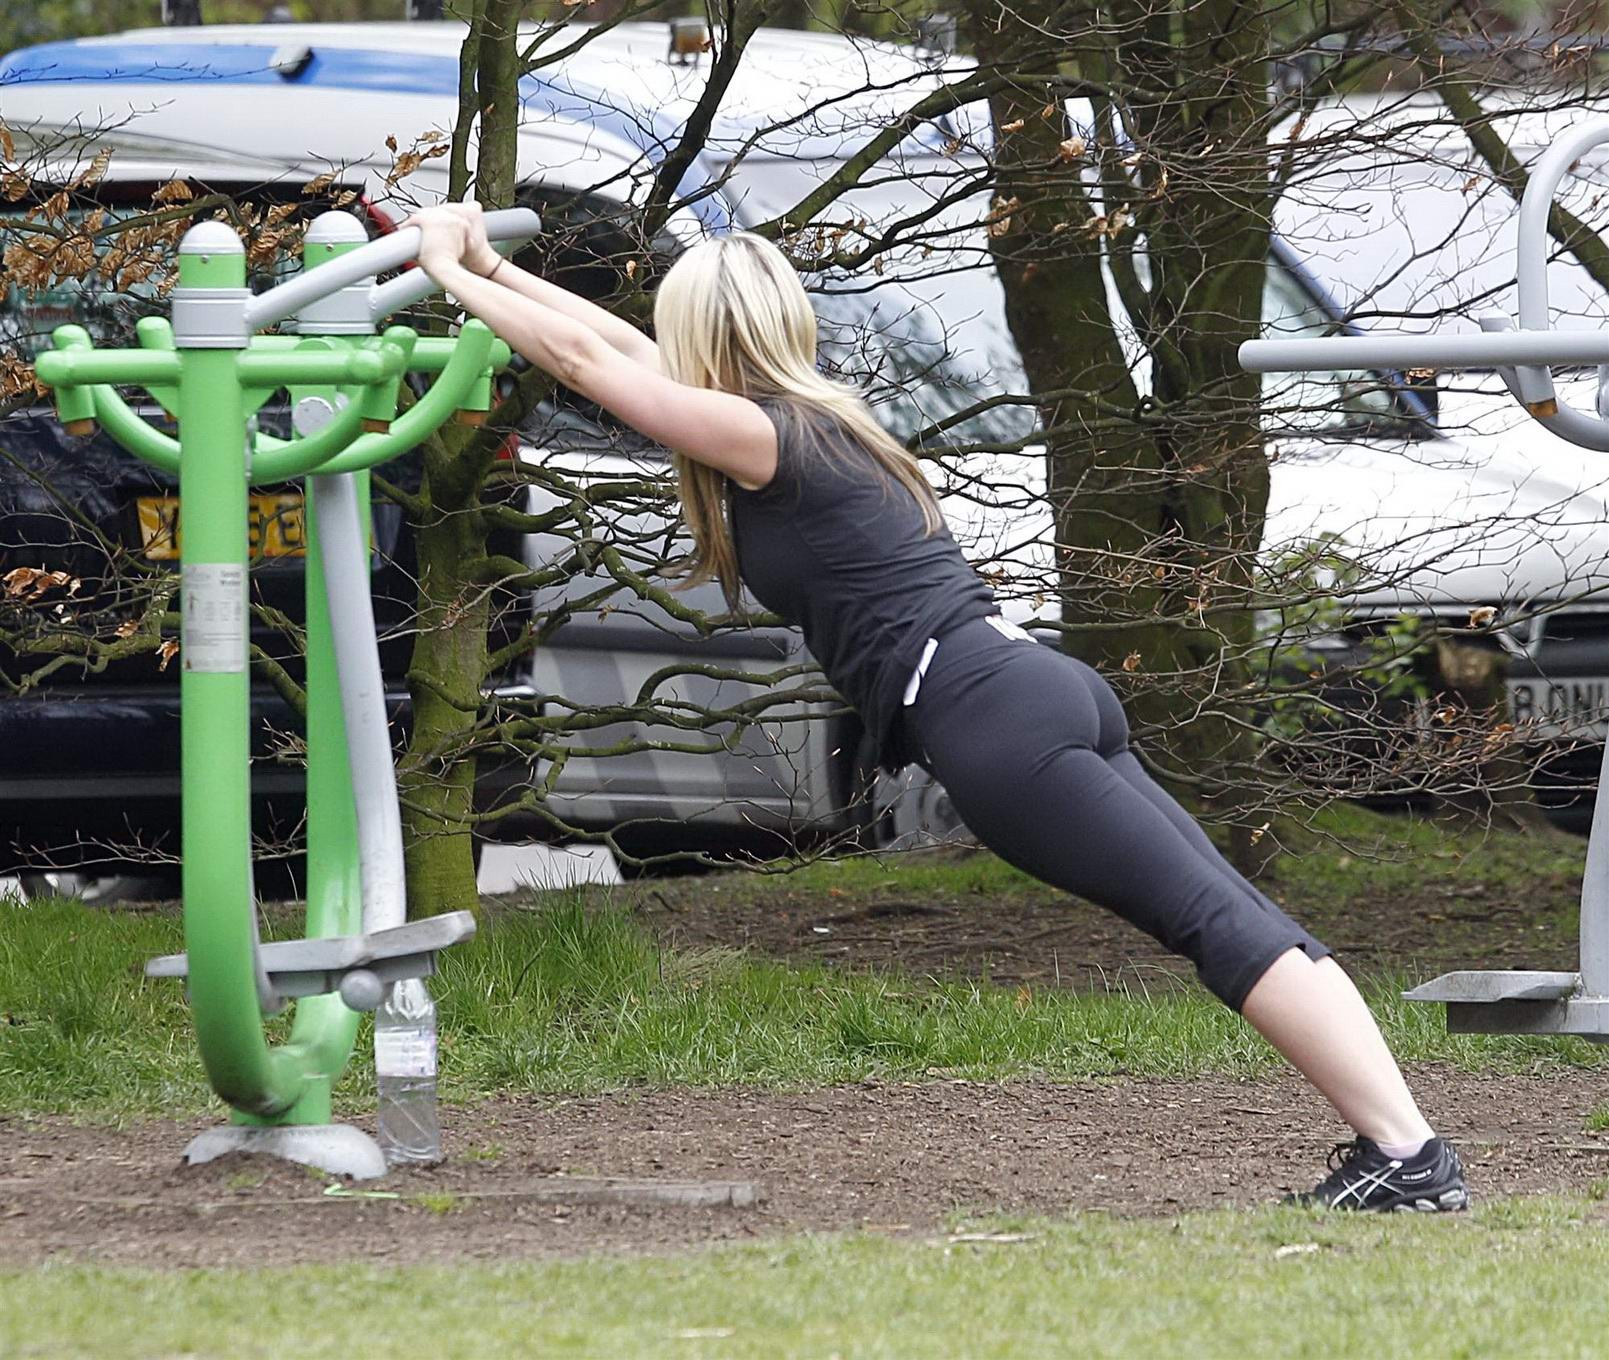 Jennifer Ellison shows off her ass in tight sweatpants while working out in Live #75305664